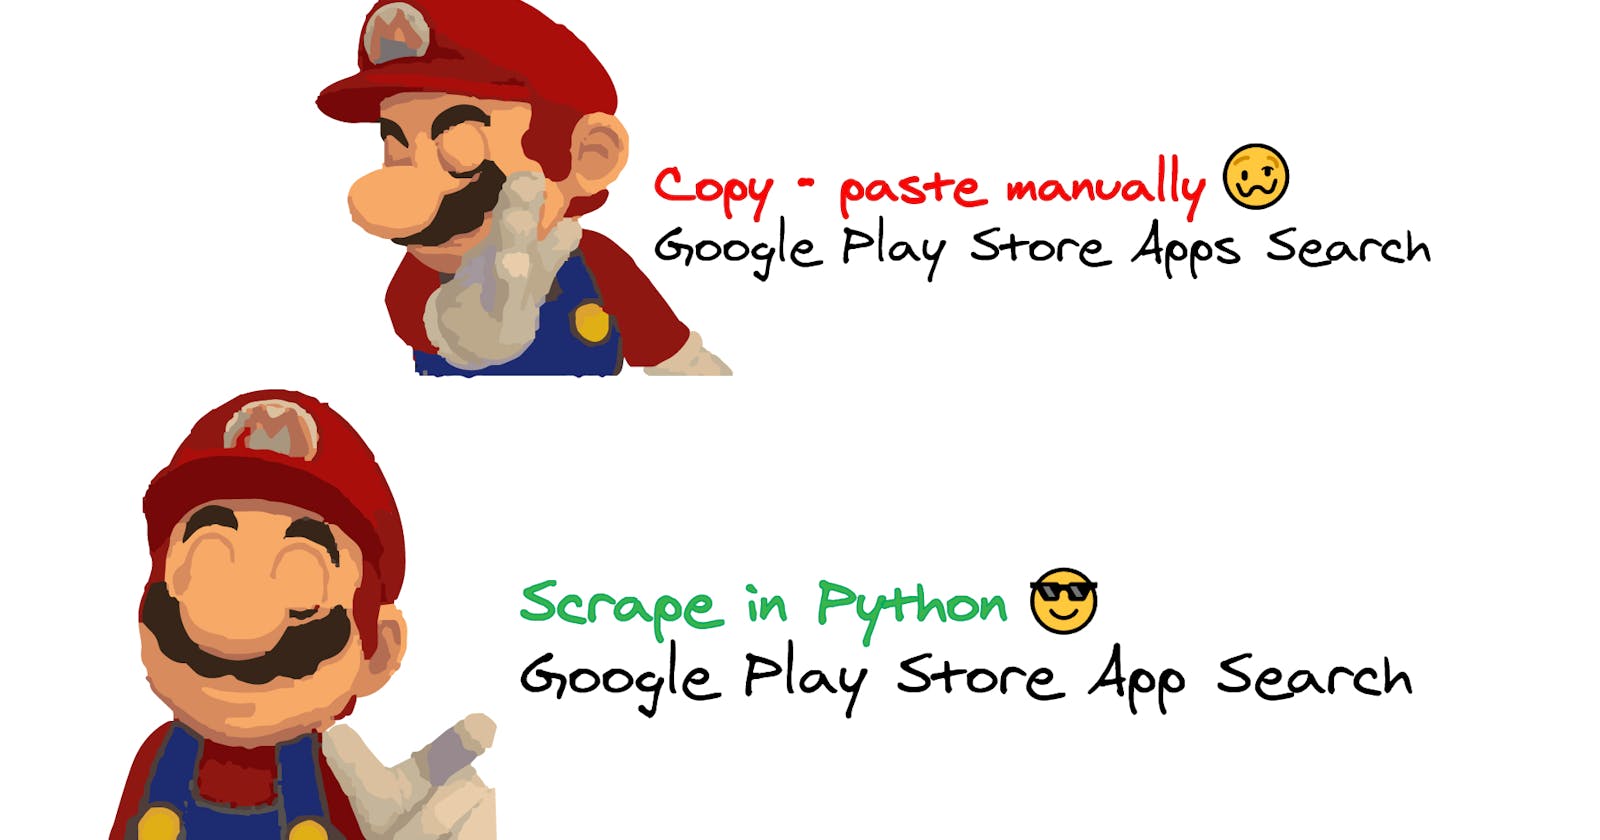 Scrape Google Play Search Apps in Python